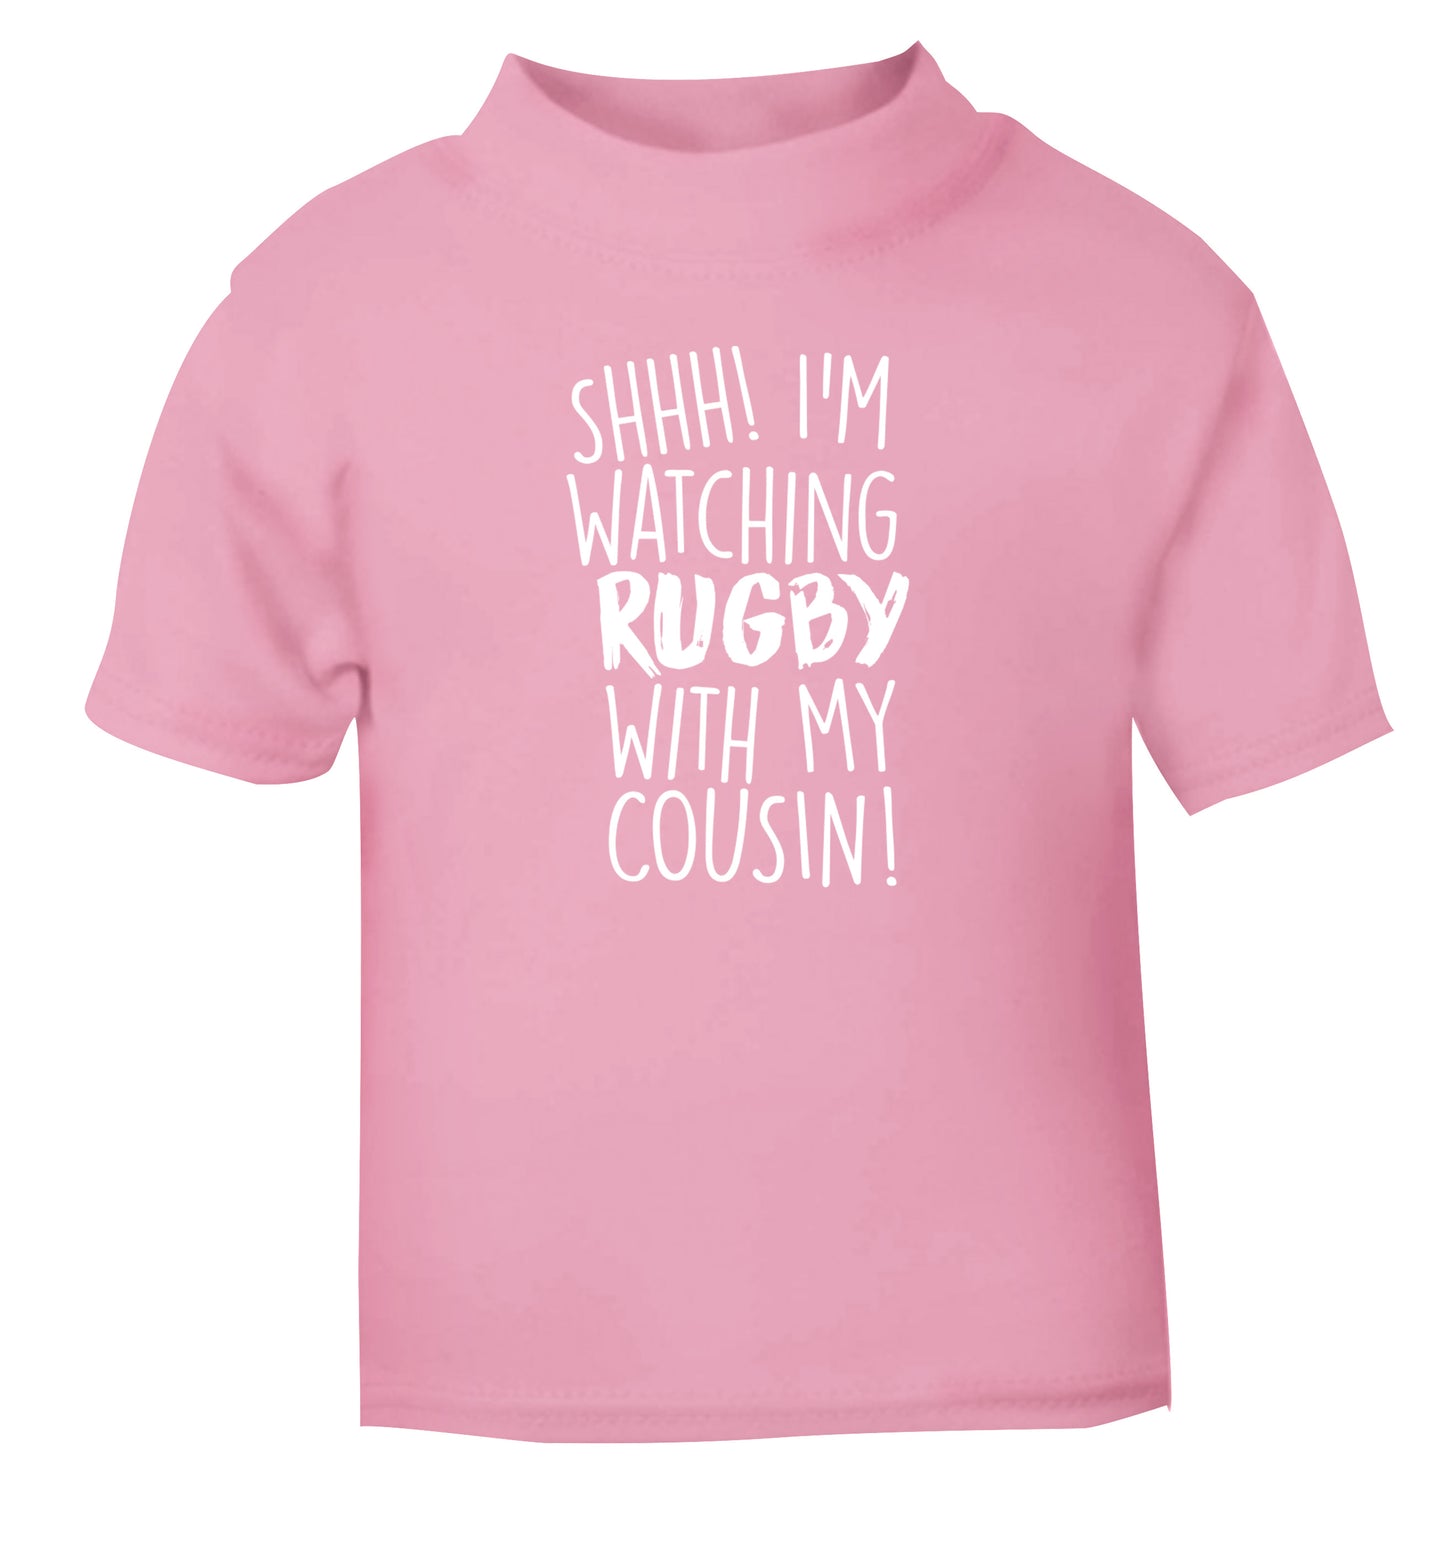 Shhh I'm watching rugby with my cousin light pink Baby Toddler Tshirt 2 Years